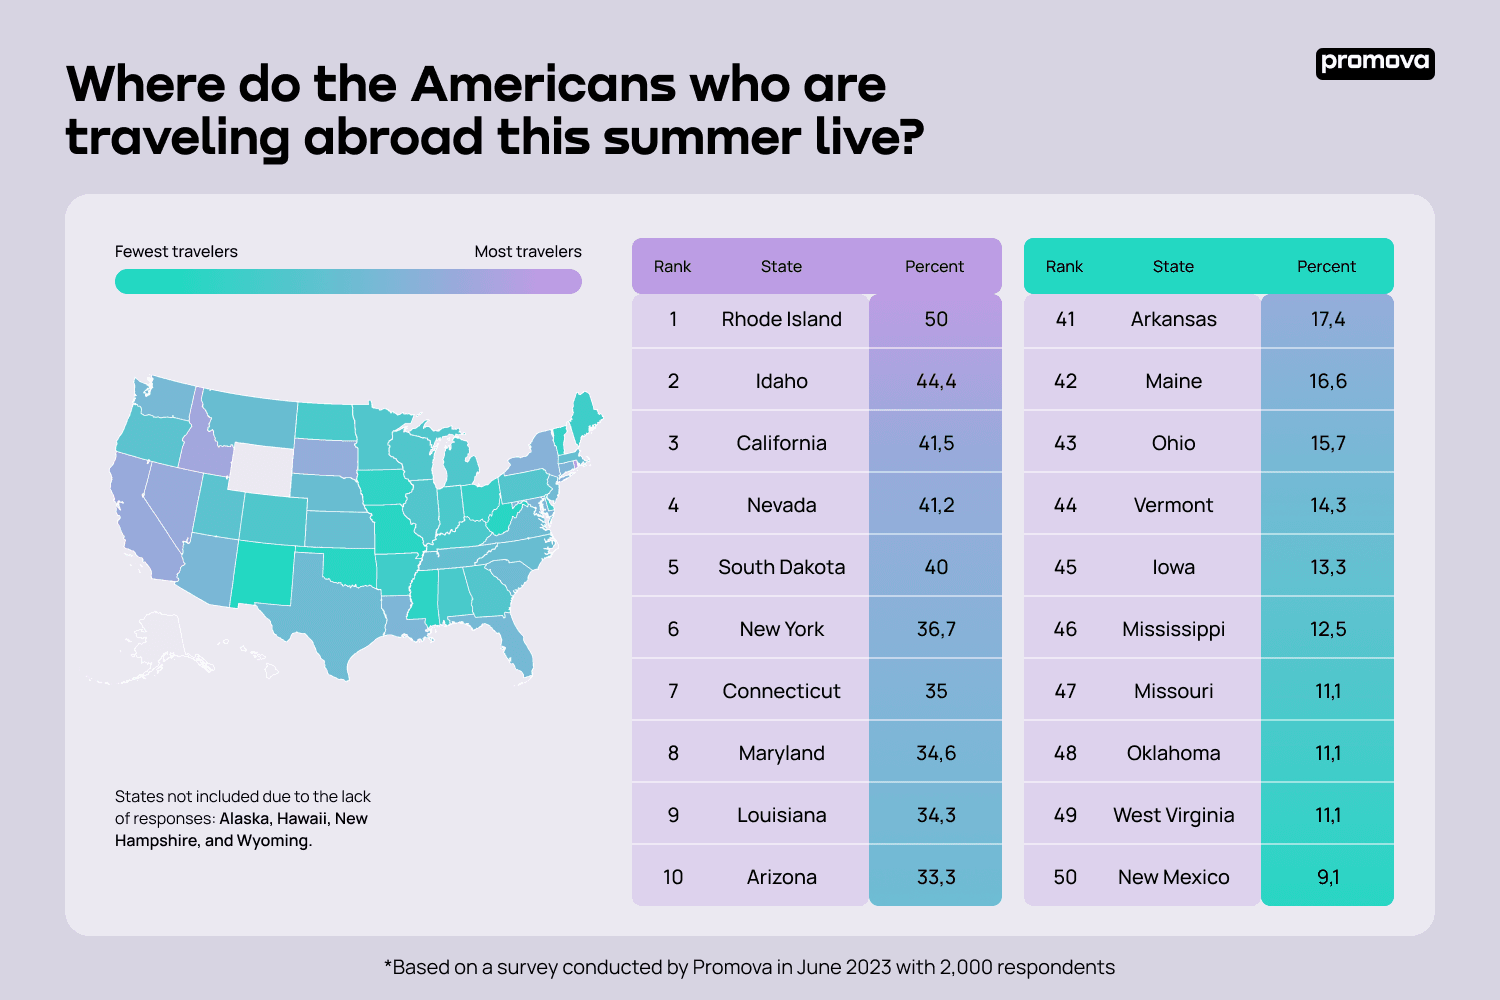 2_The U.S states where Americans are going to travel abroad in the summer 2023.png